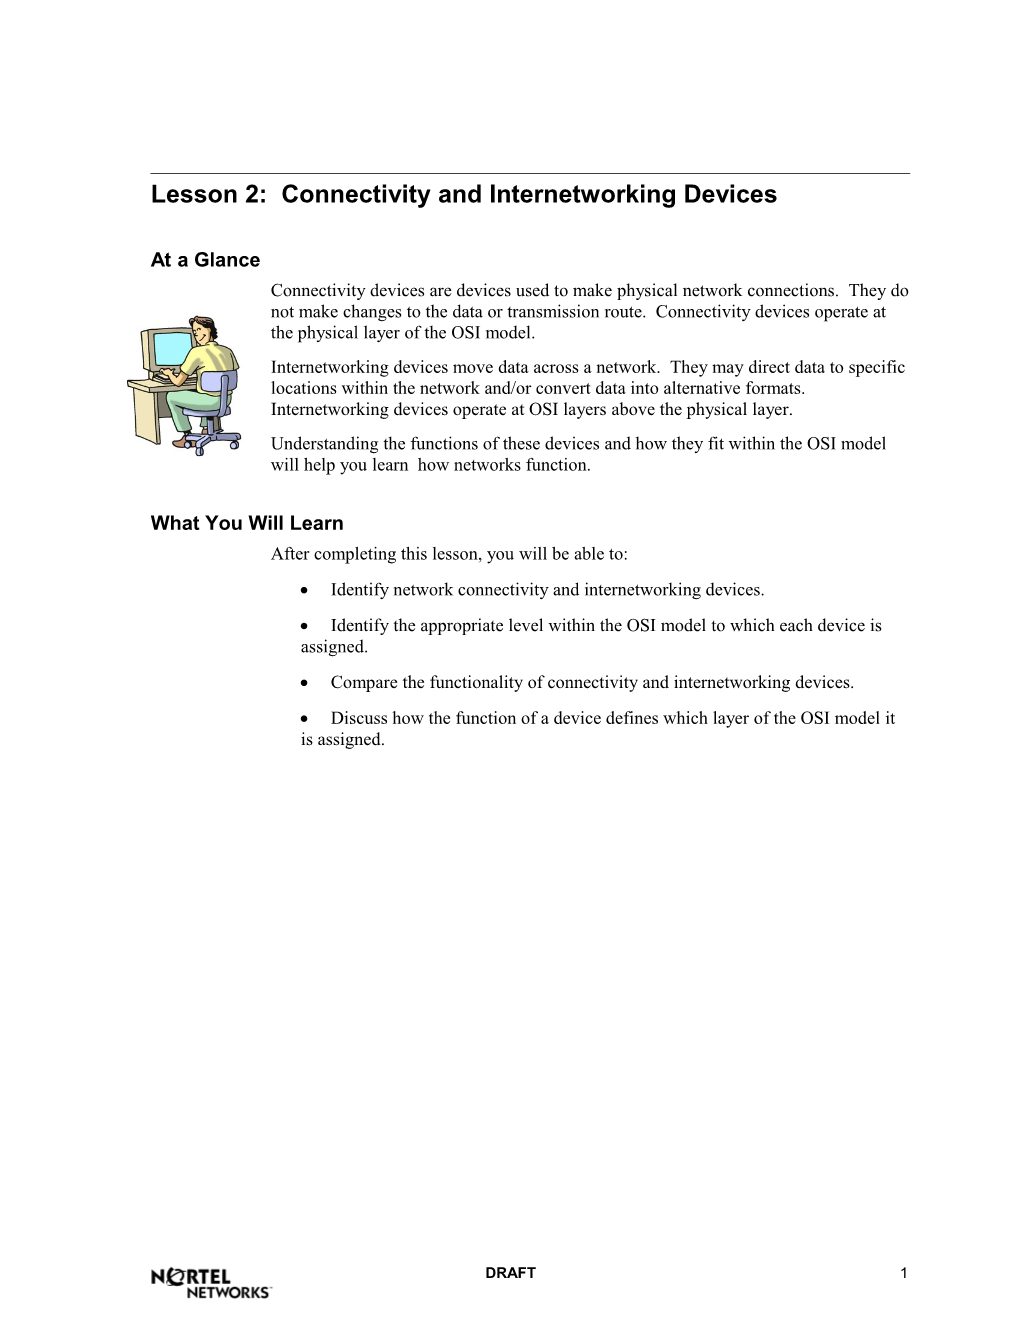 Lesson 2: Connectivity and Internetworking Devices